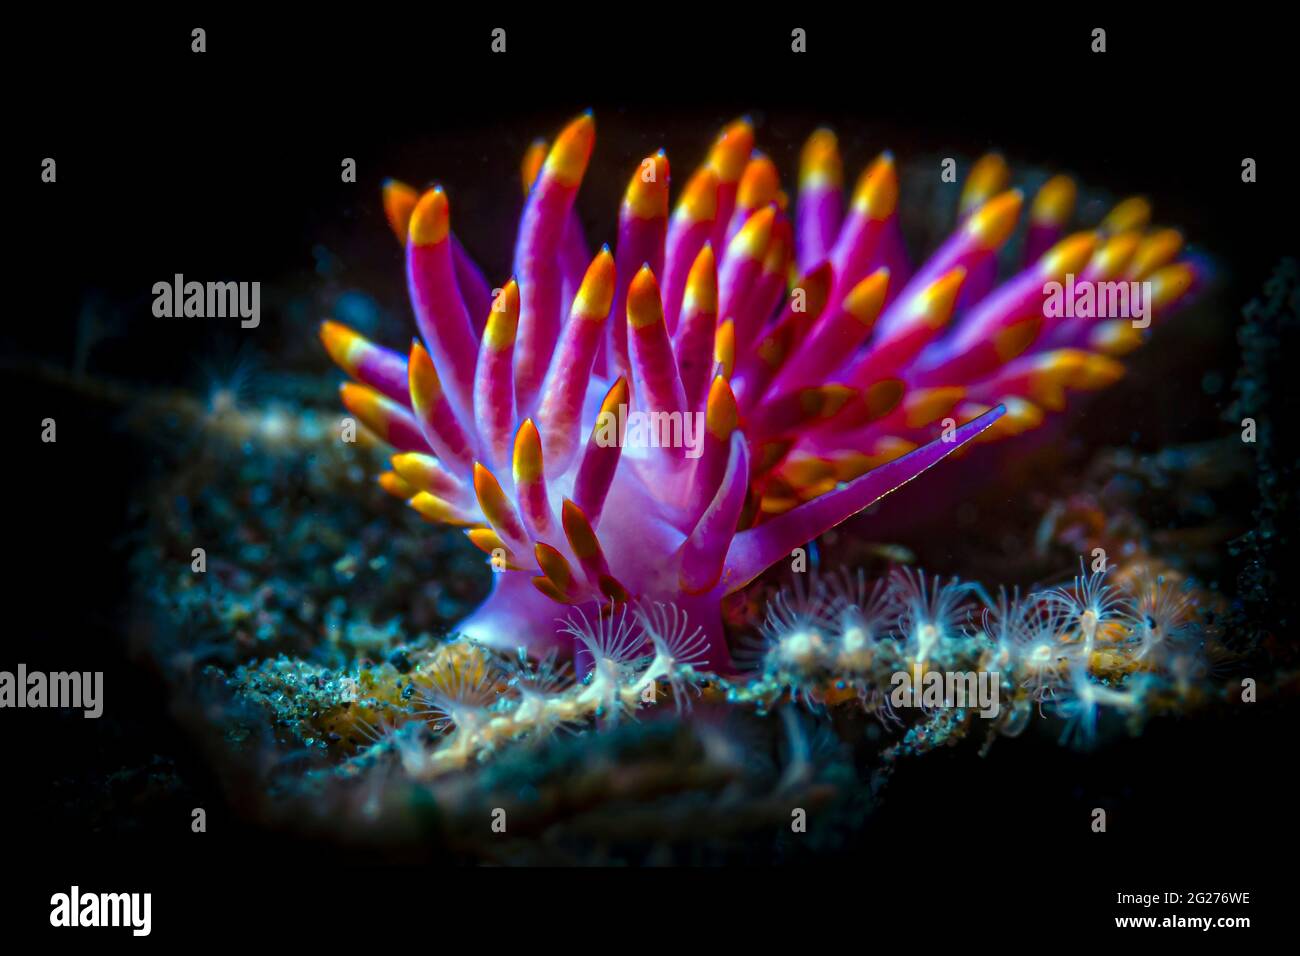 Snooted image of a Cuthona sibogae nudibranch. Stock Photo